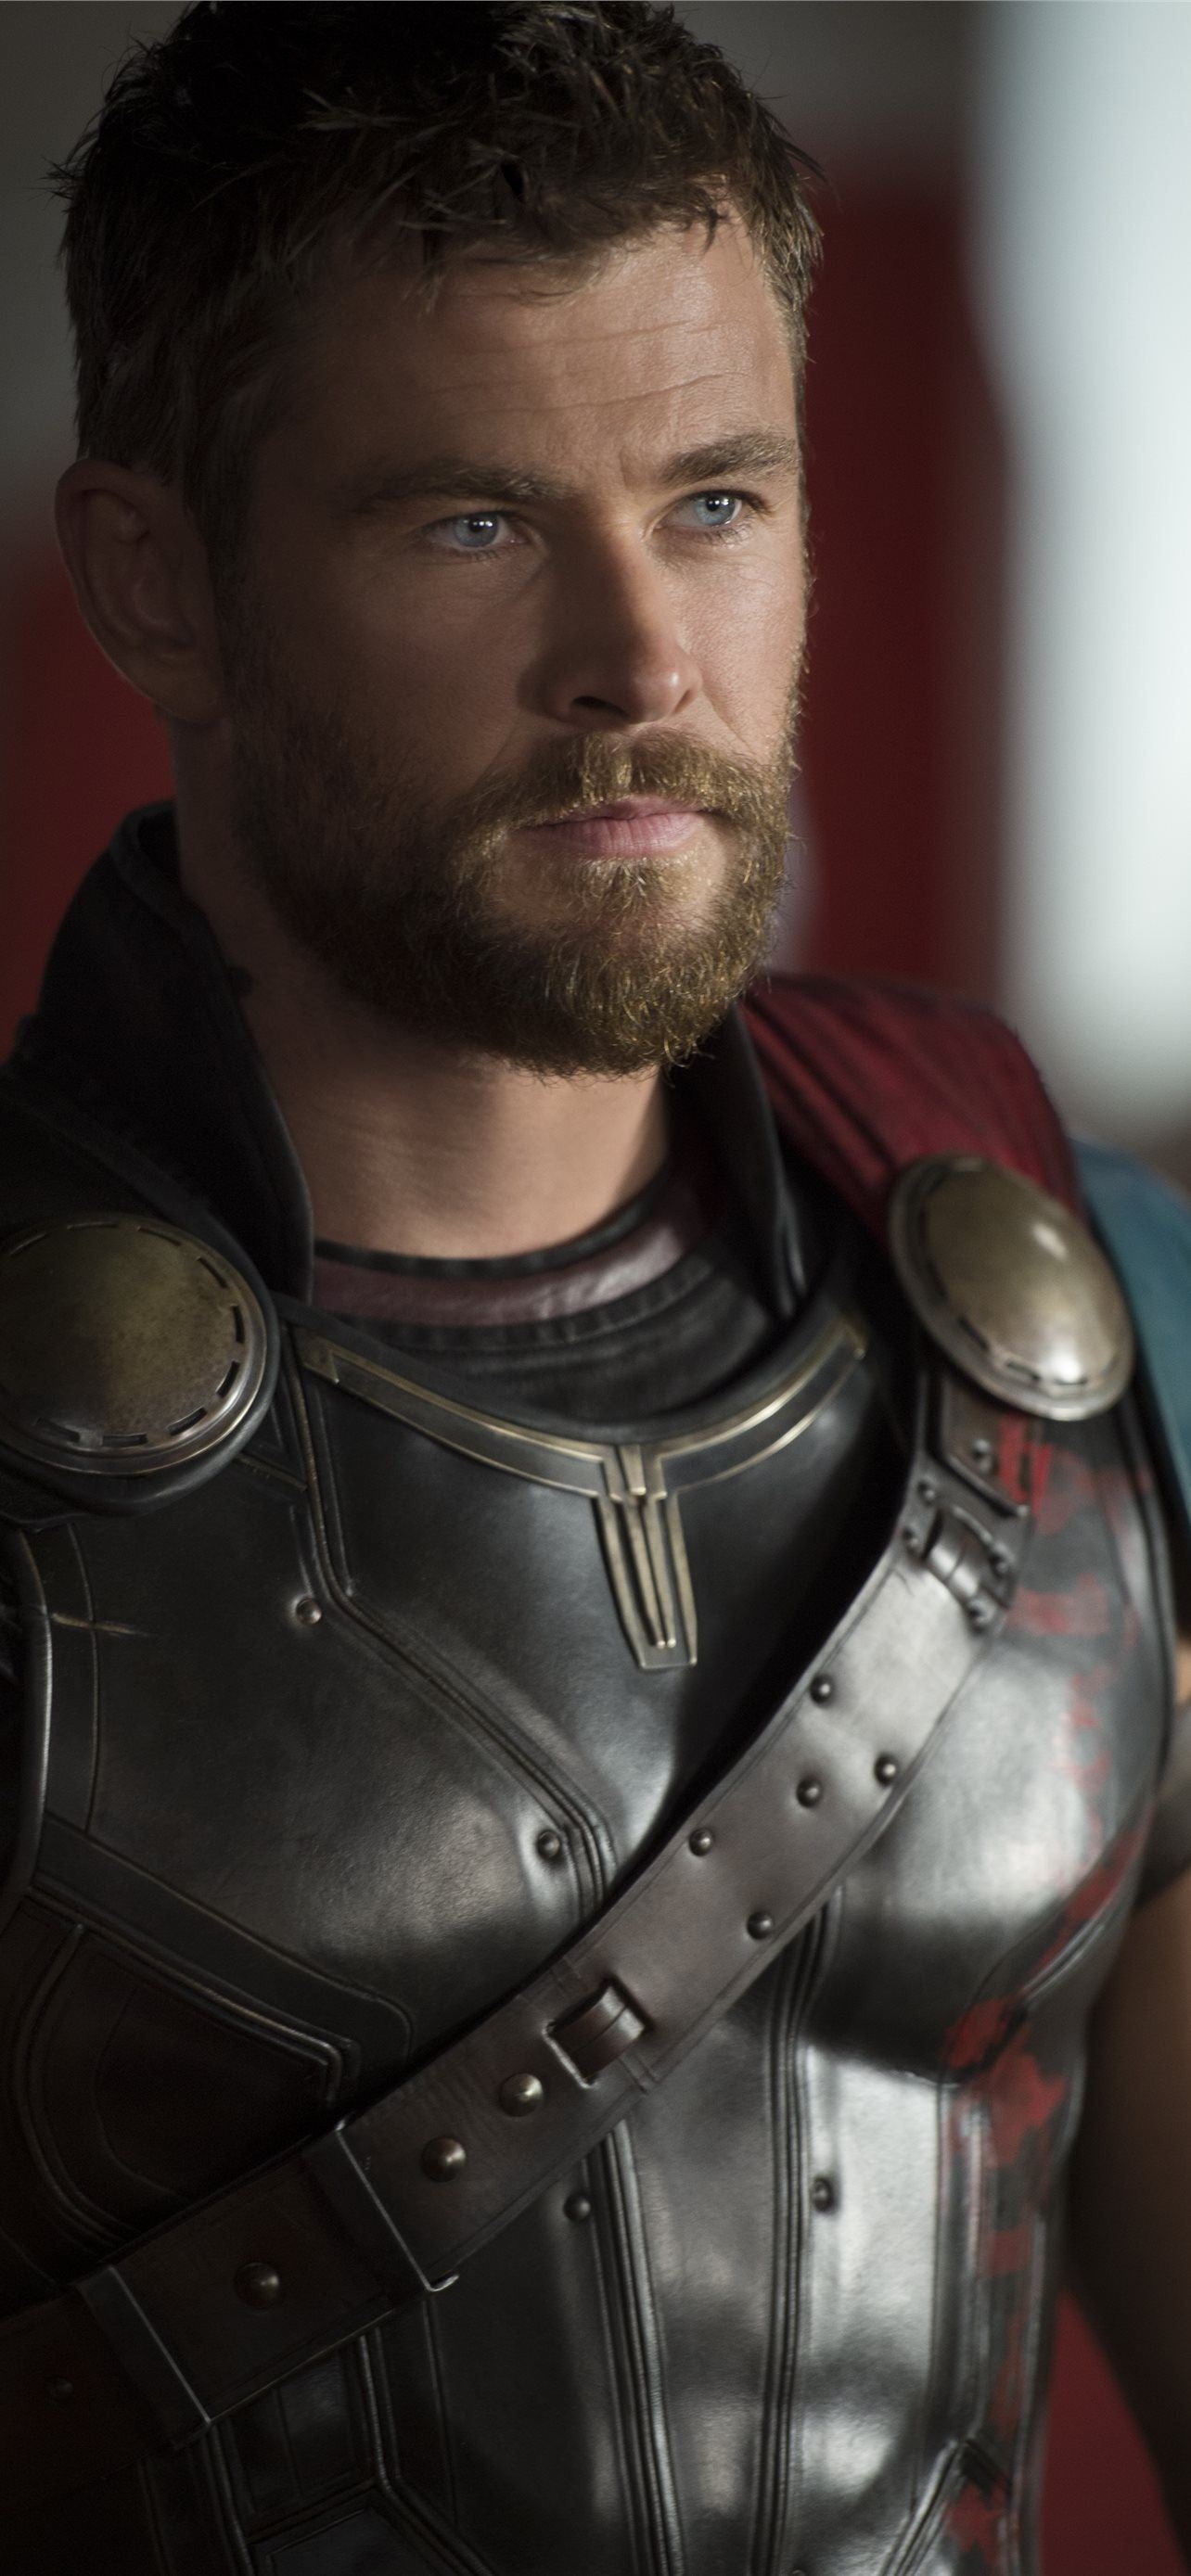 Chris Hemsworth: An Avenger and the crown prince of Asgard in Thor: Ragnarok. 1290x2780 HD Background.